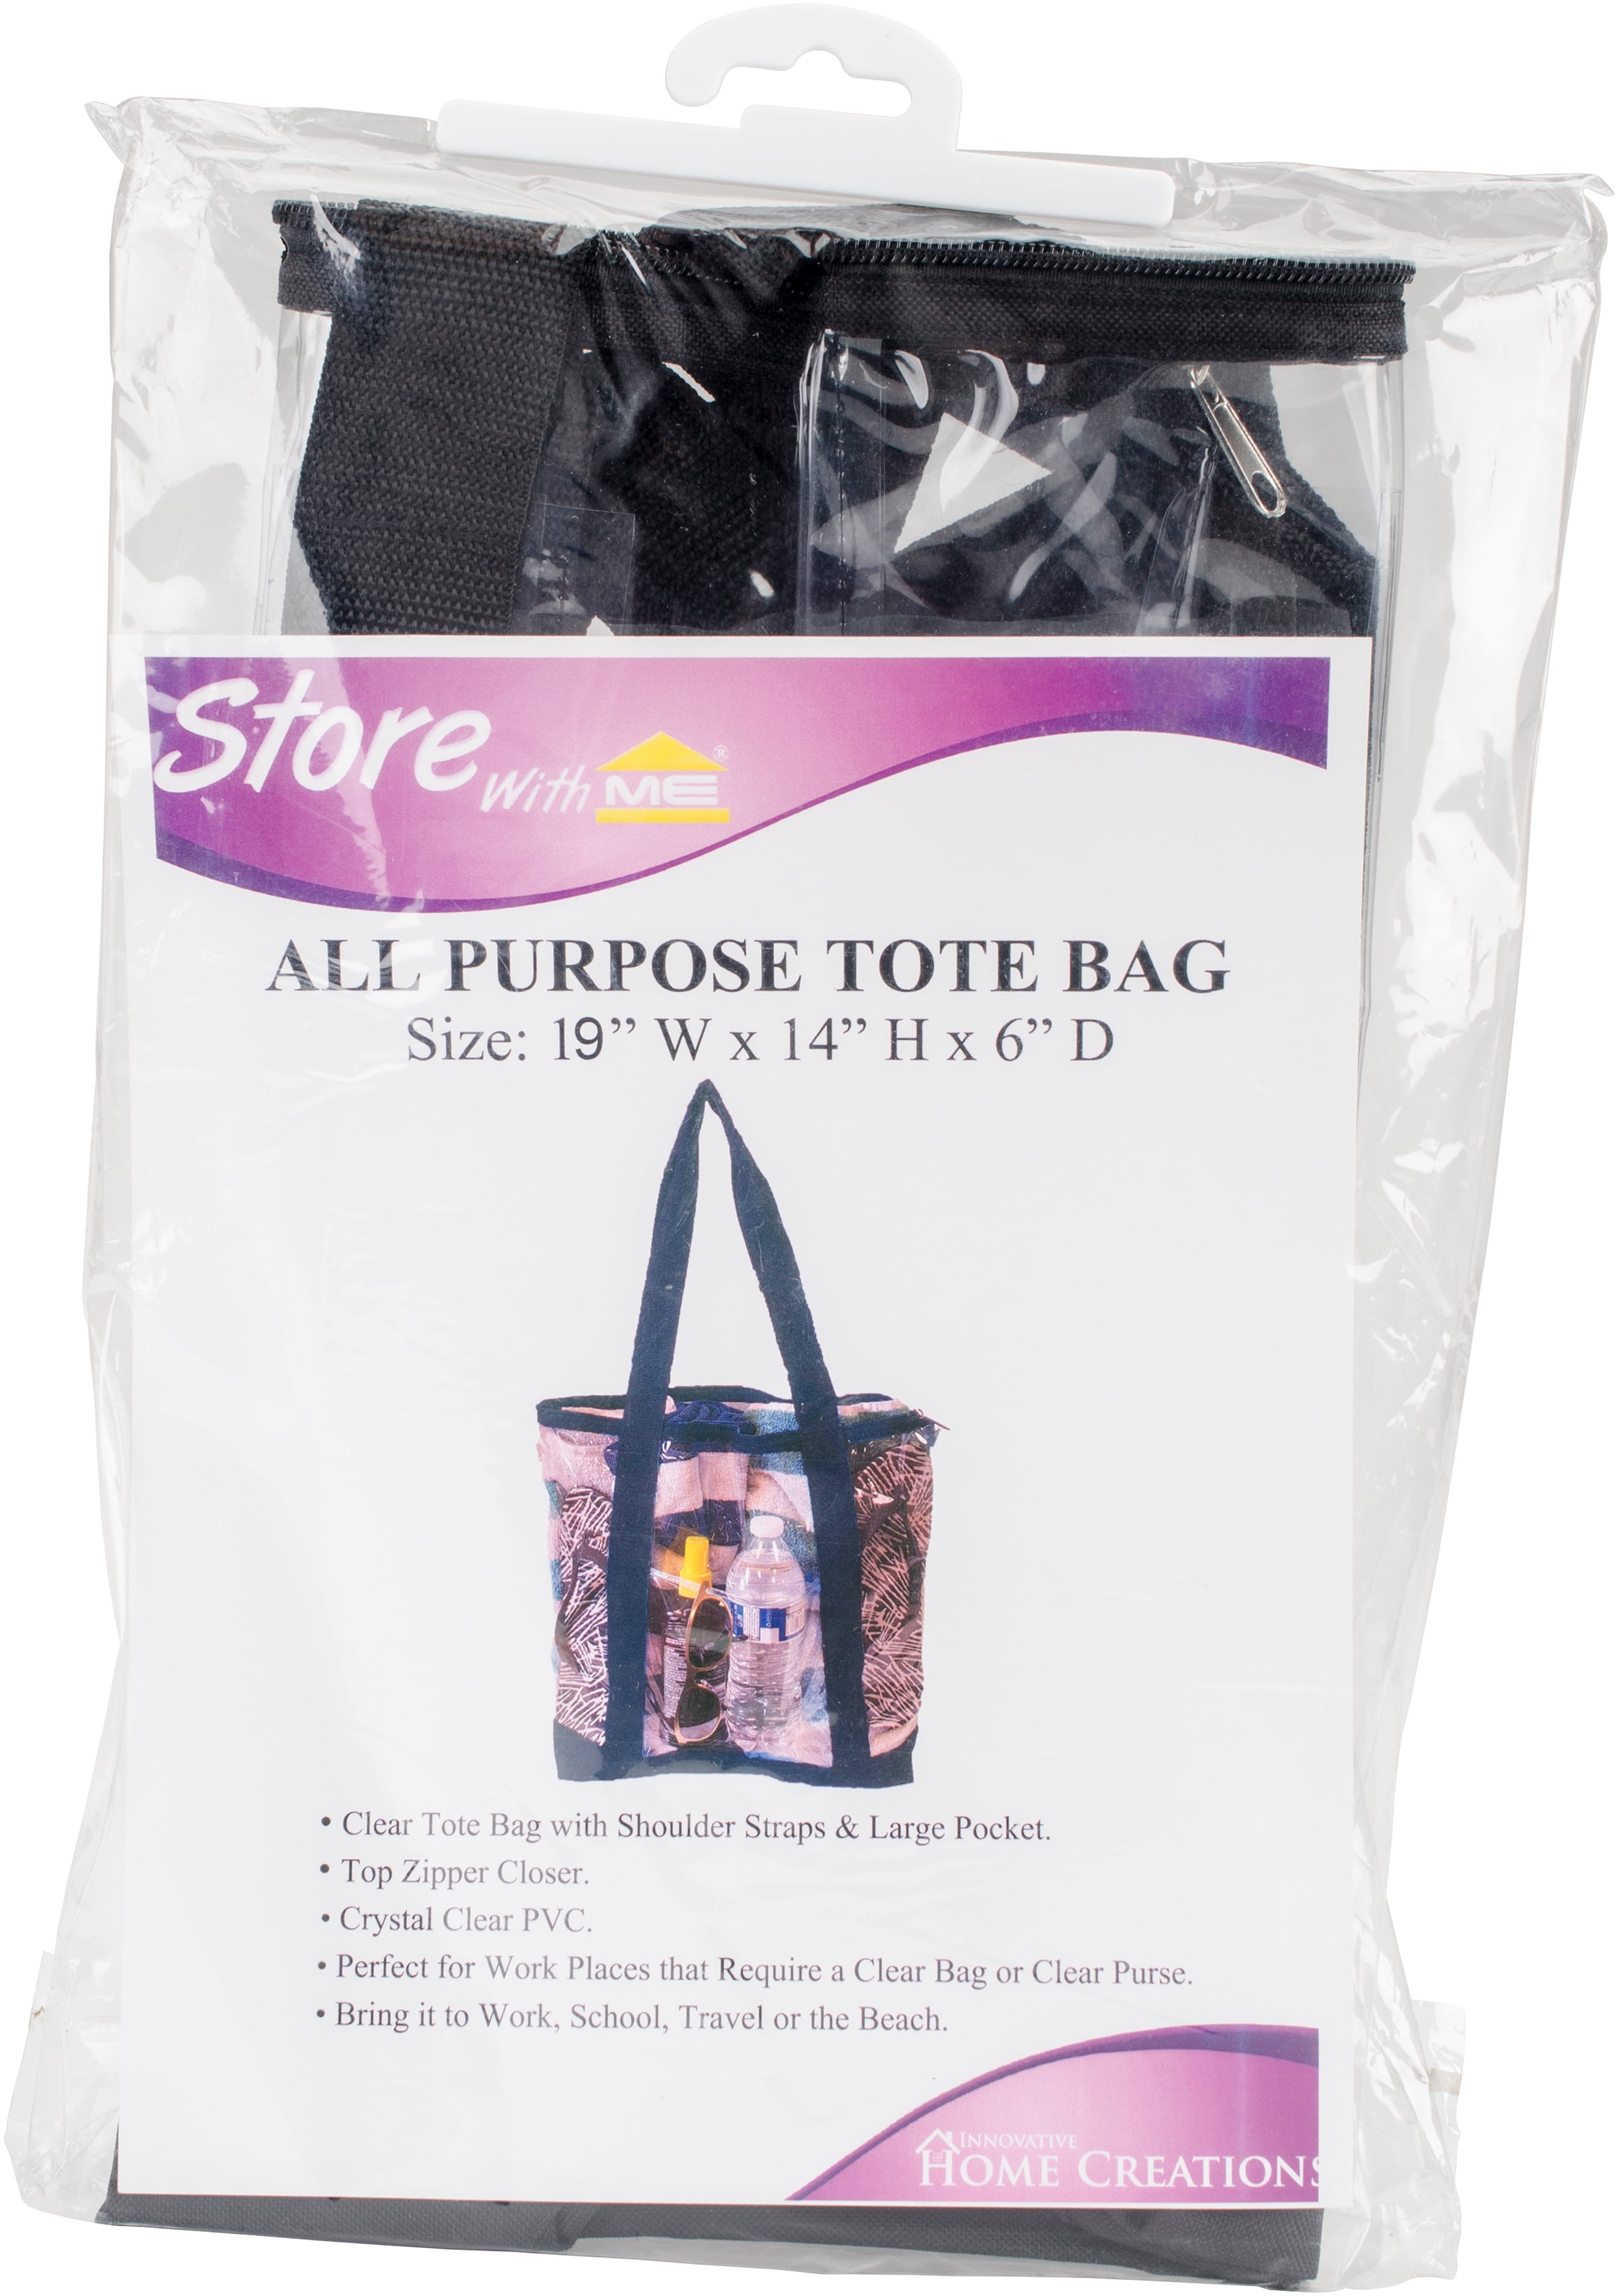 How to Store Tote Bags at Home